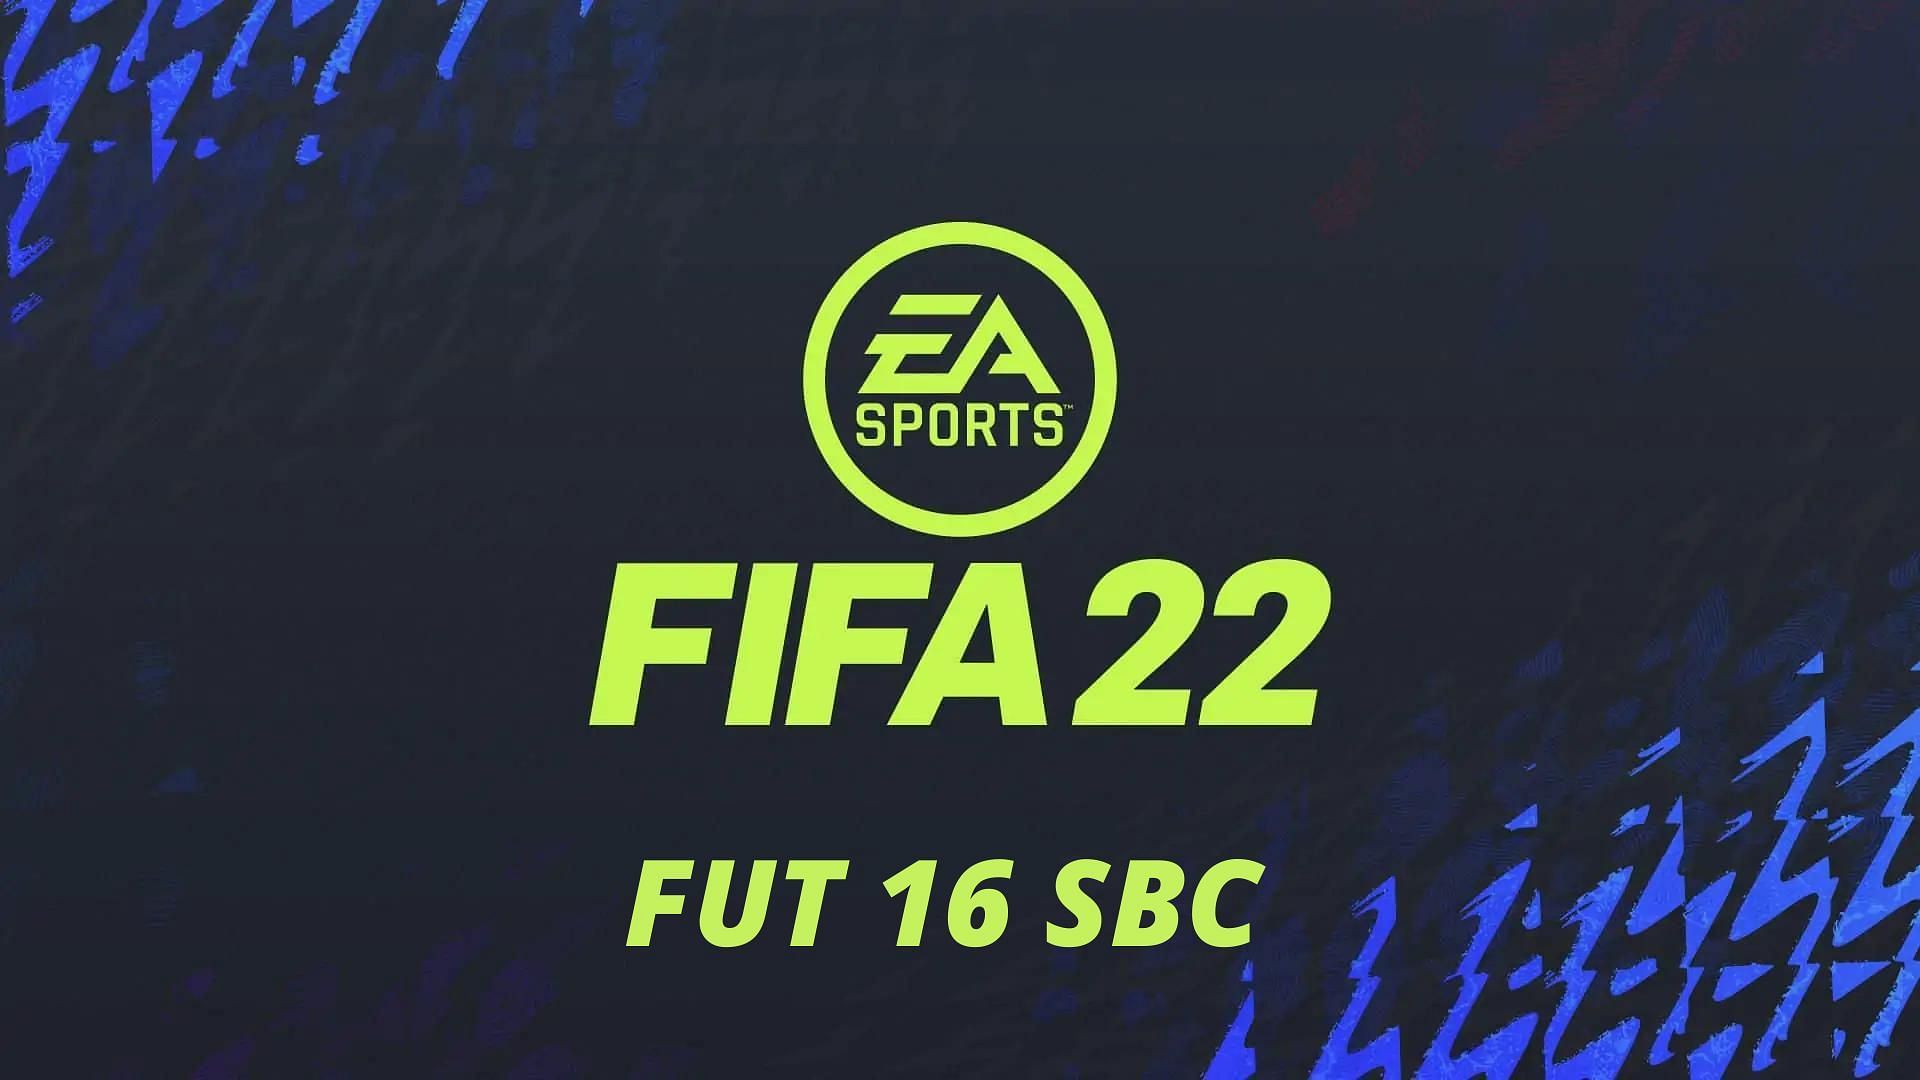 FIFA 22 Ultimate Team: How to complete the FUT 16 SBC in FUT 22